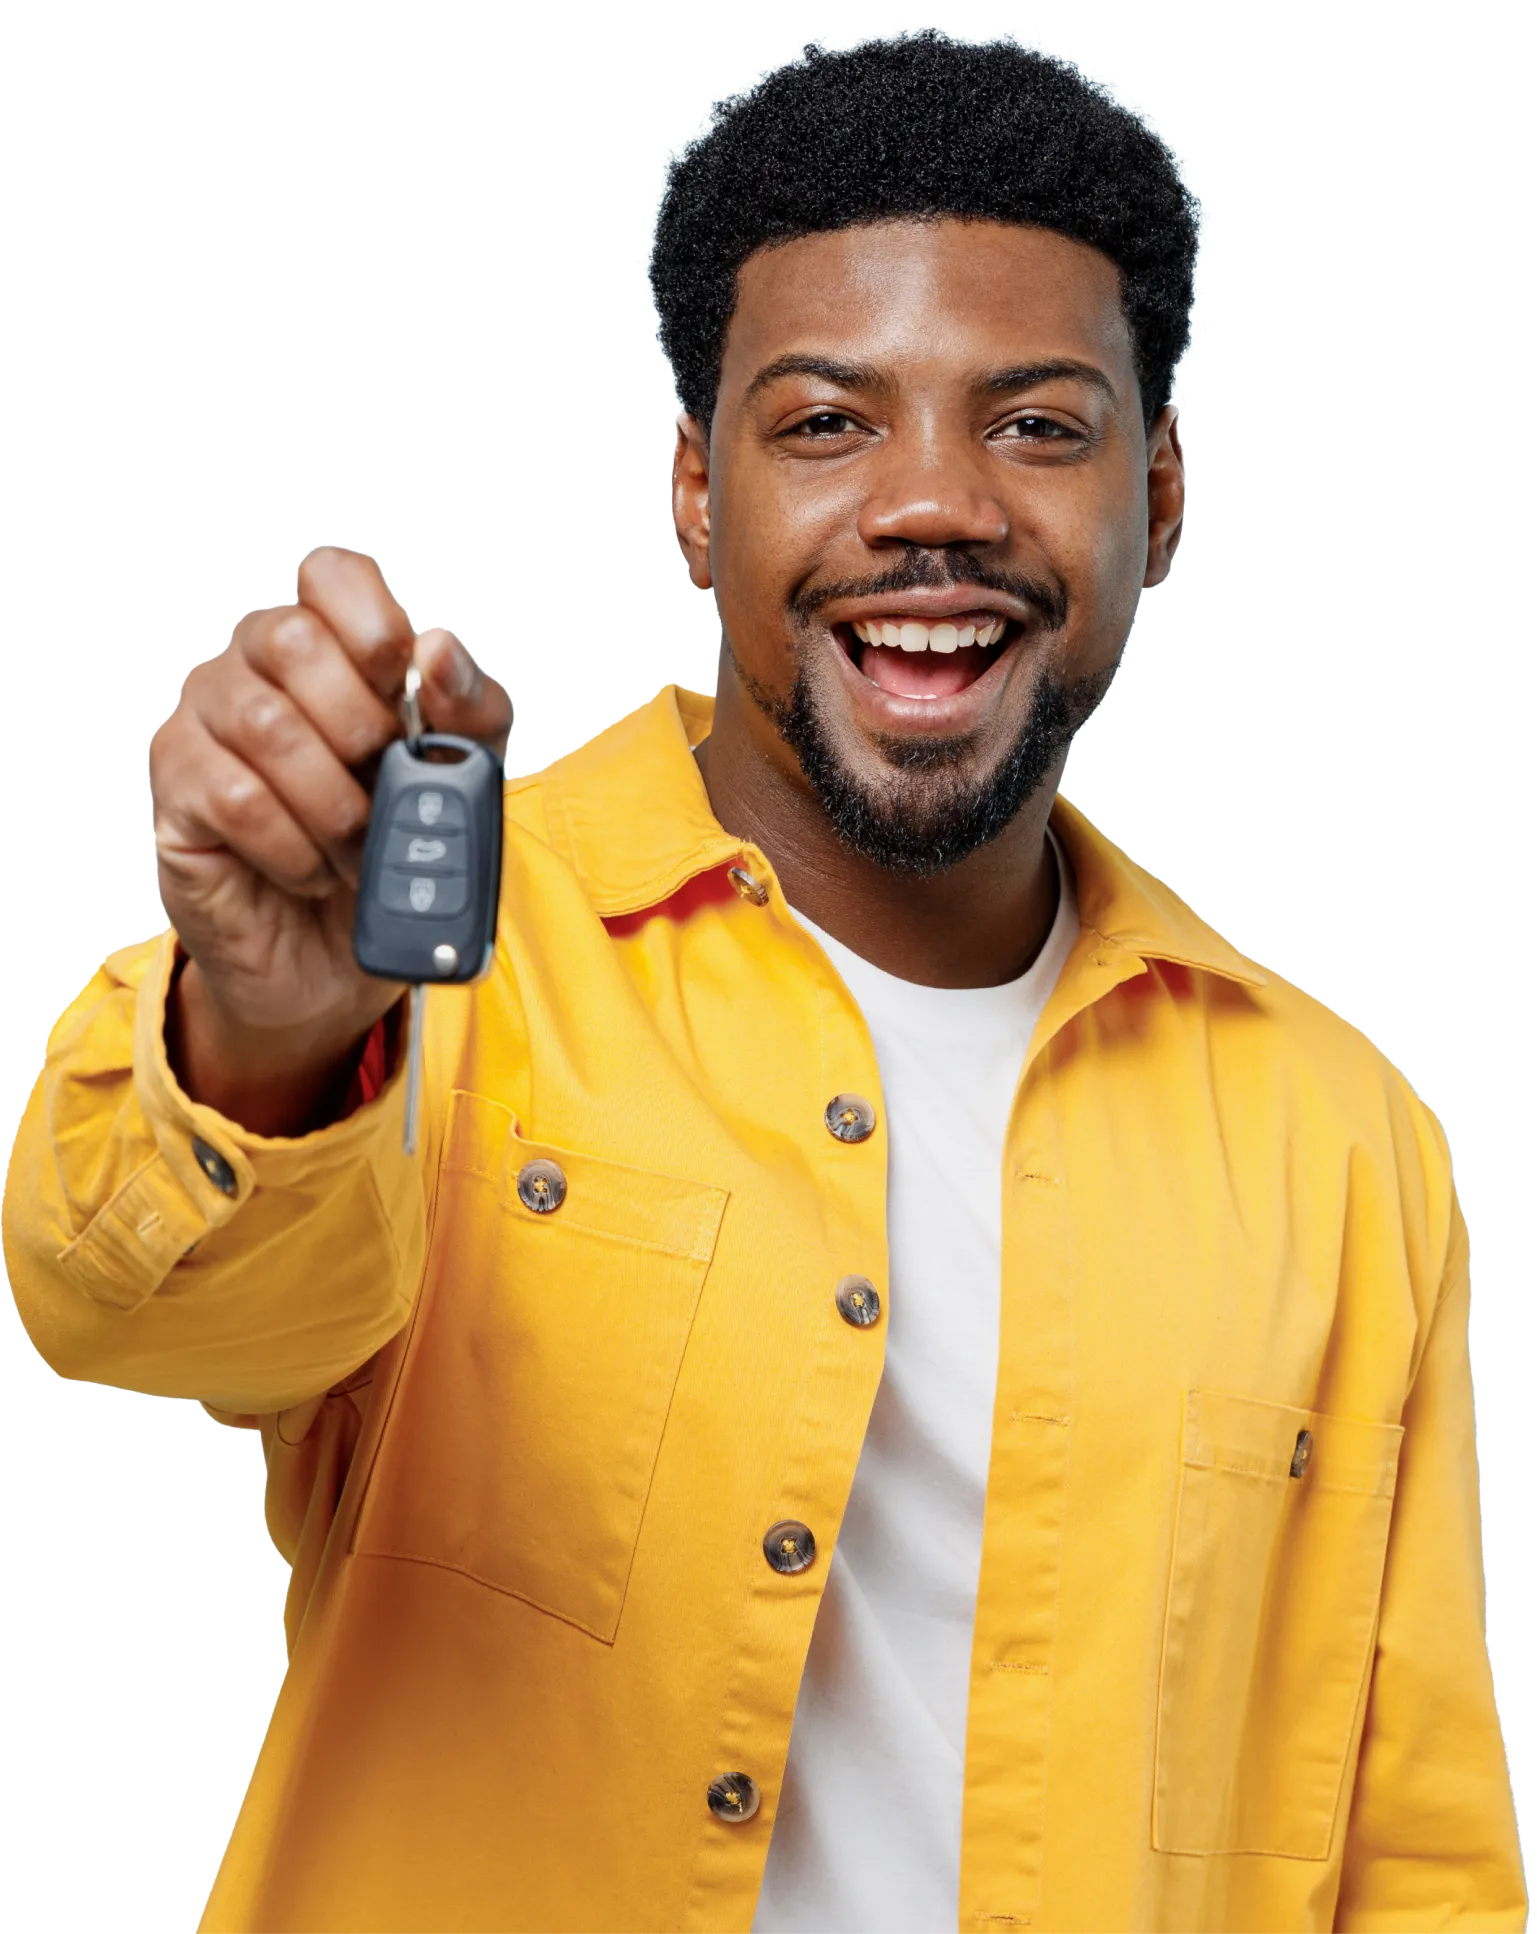 Man smiling and holding up keys